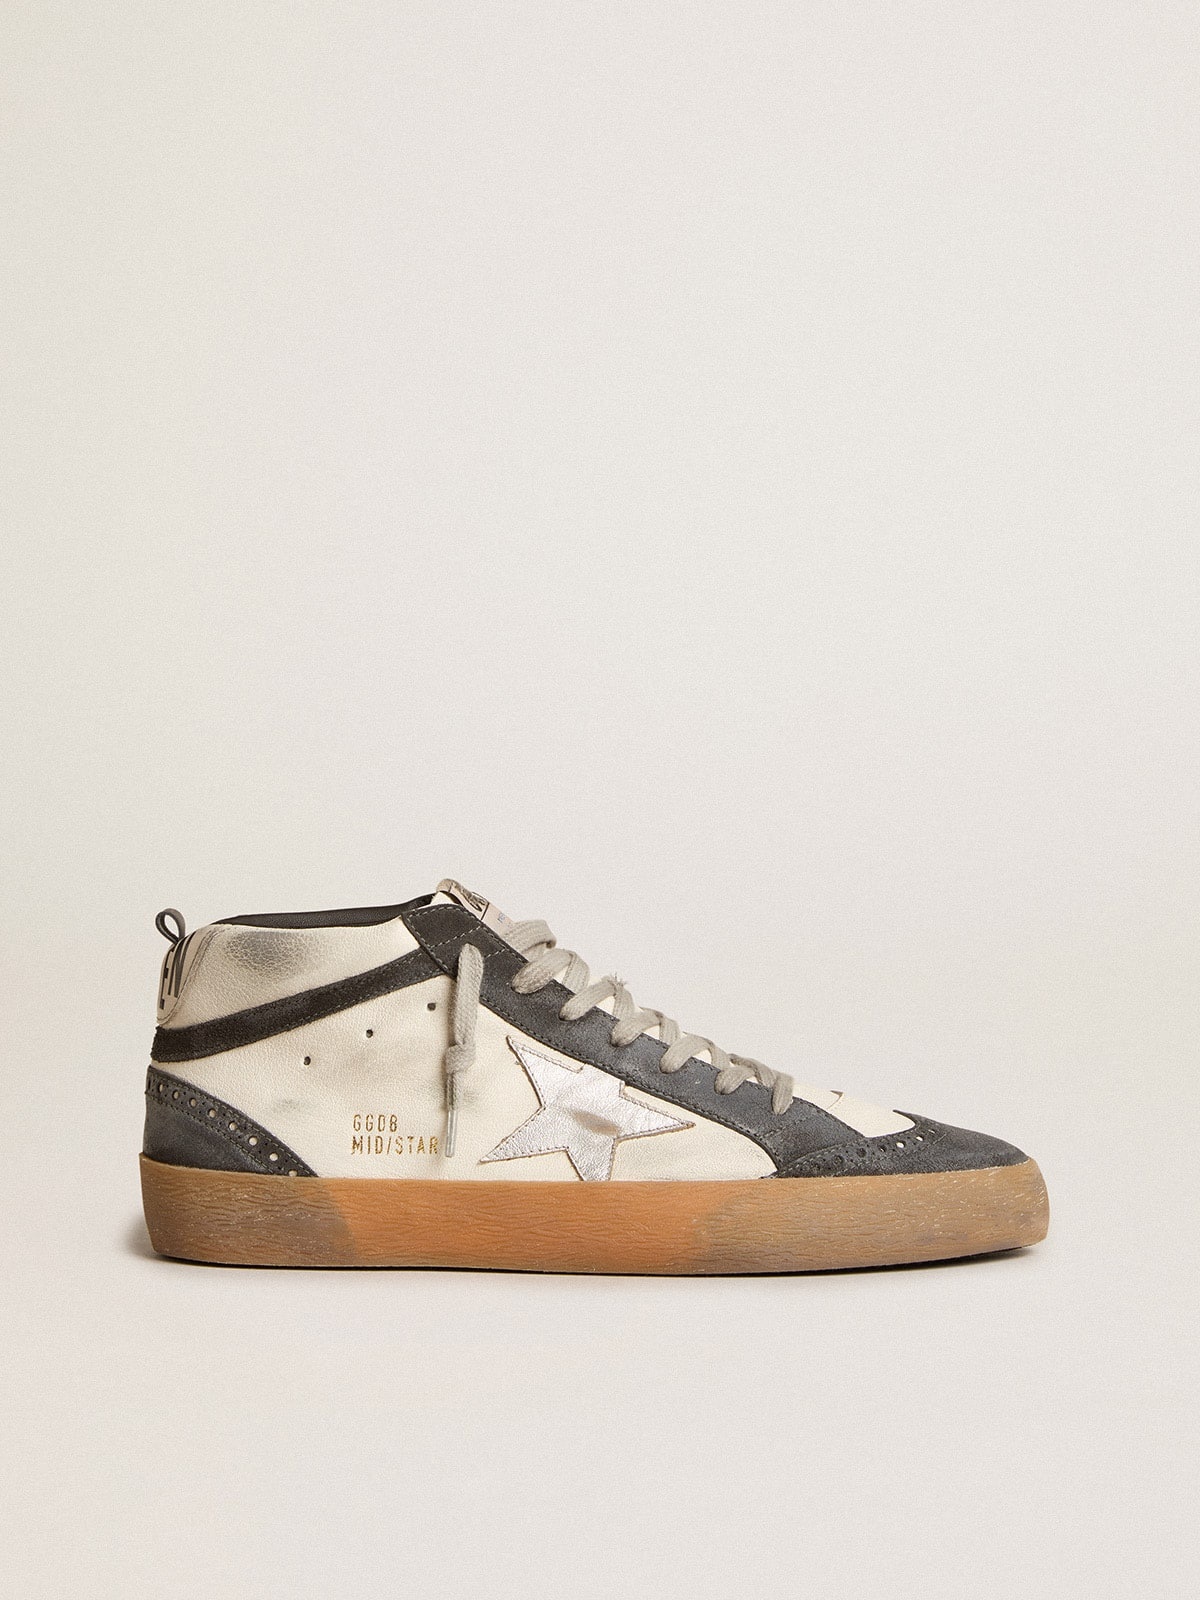 Mid Star in nappa leather with silver leather star and black suede flash - 1